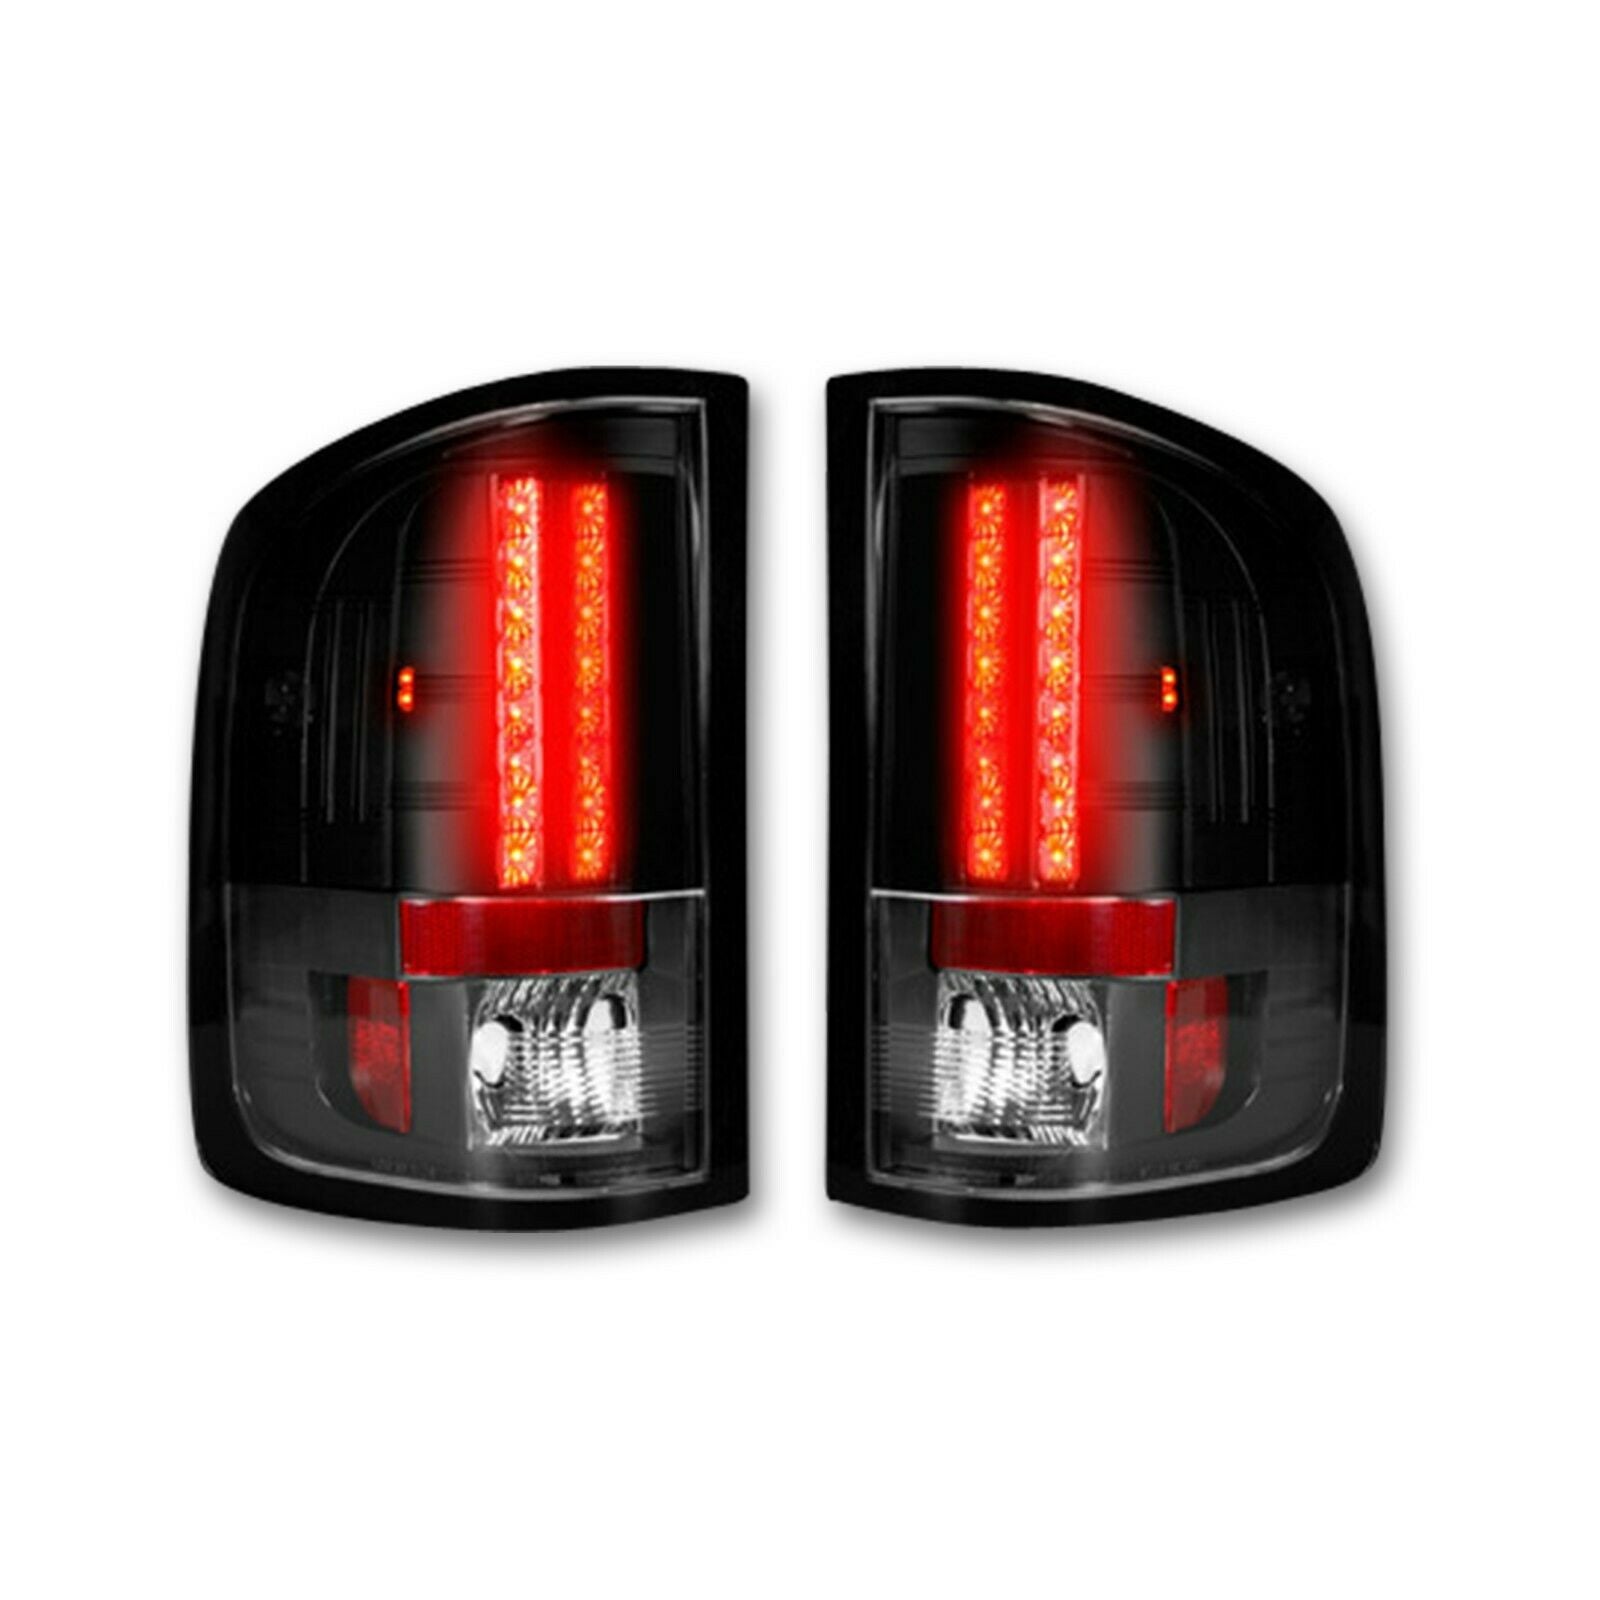 Recon SMOKED LED Tail Lights For 2007-2013 GMC SIERRA Single Wheel - 264189BK